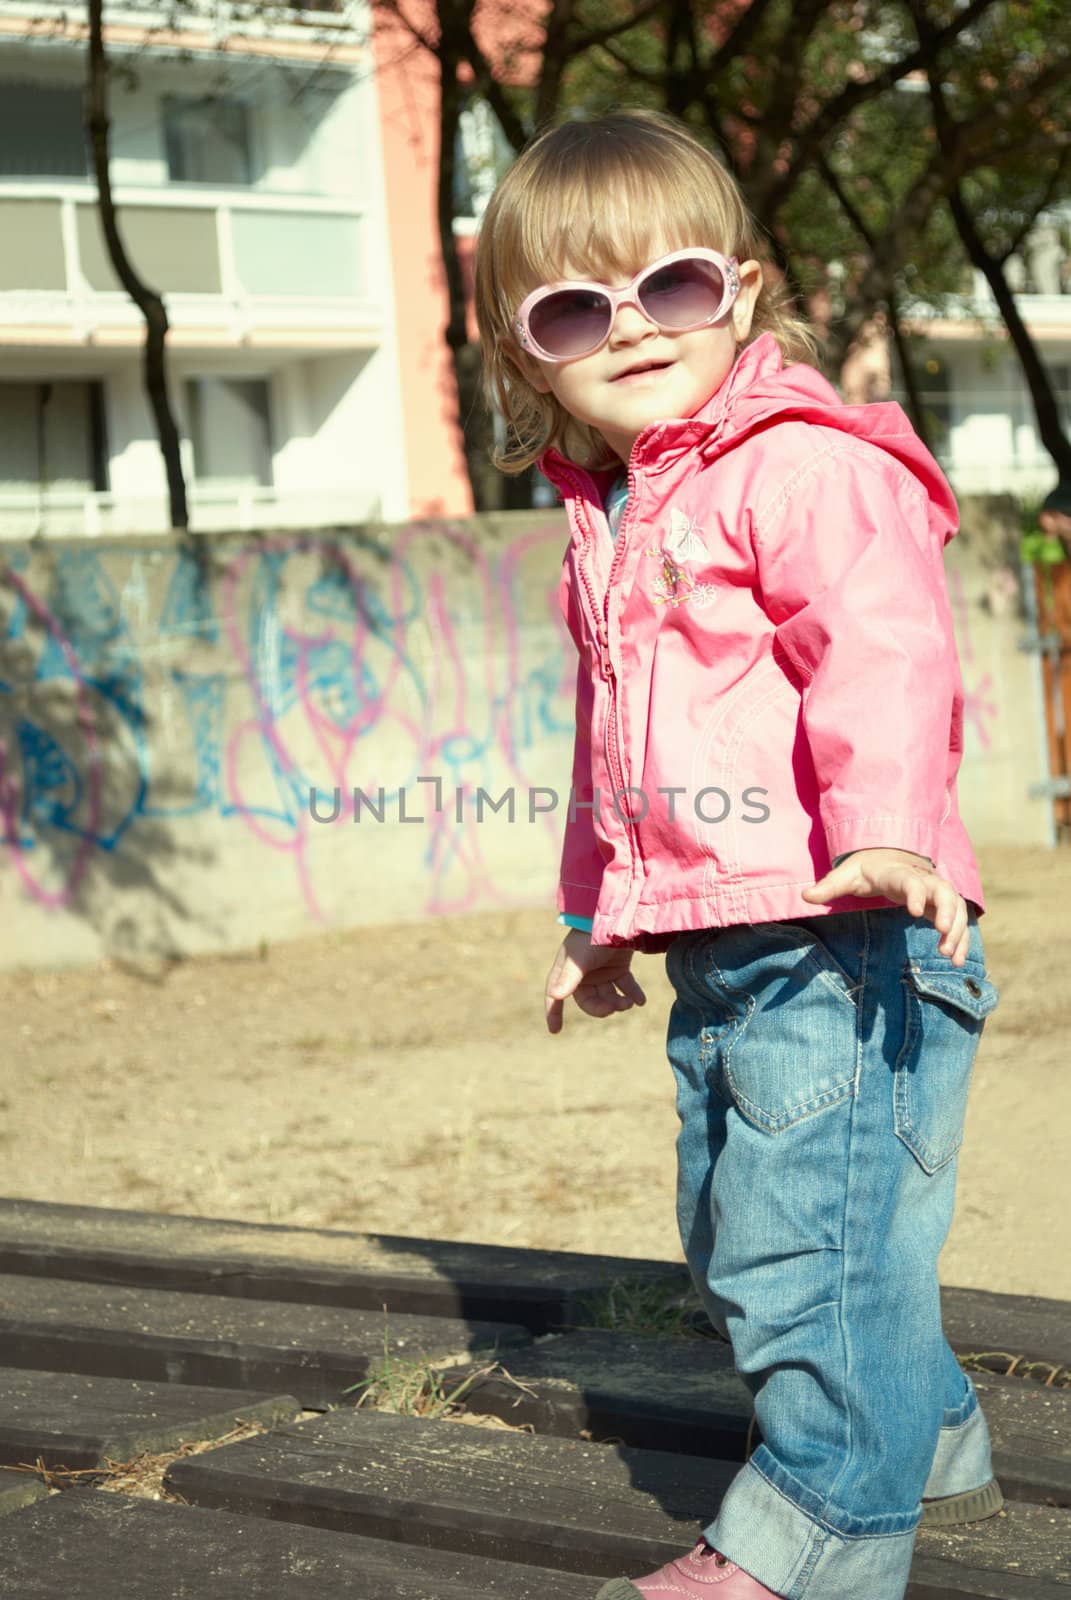 Little girl with sunglasses by Olinkau